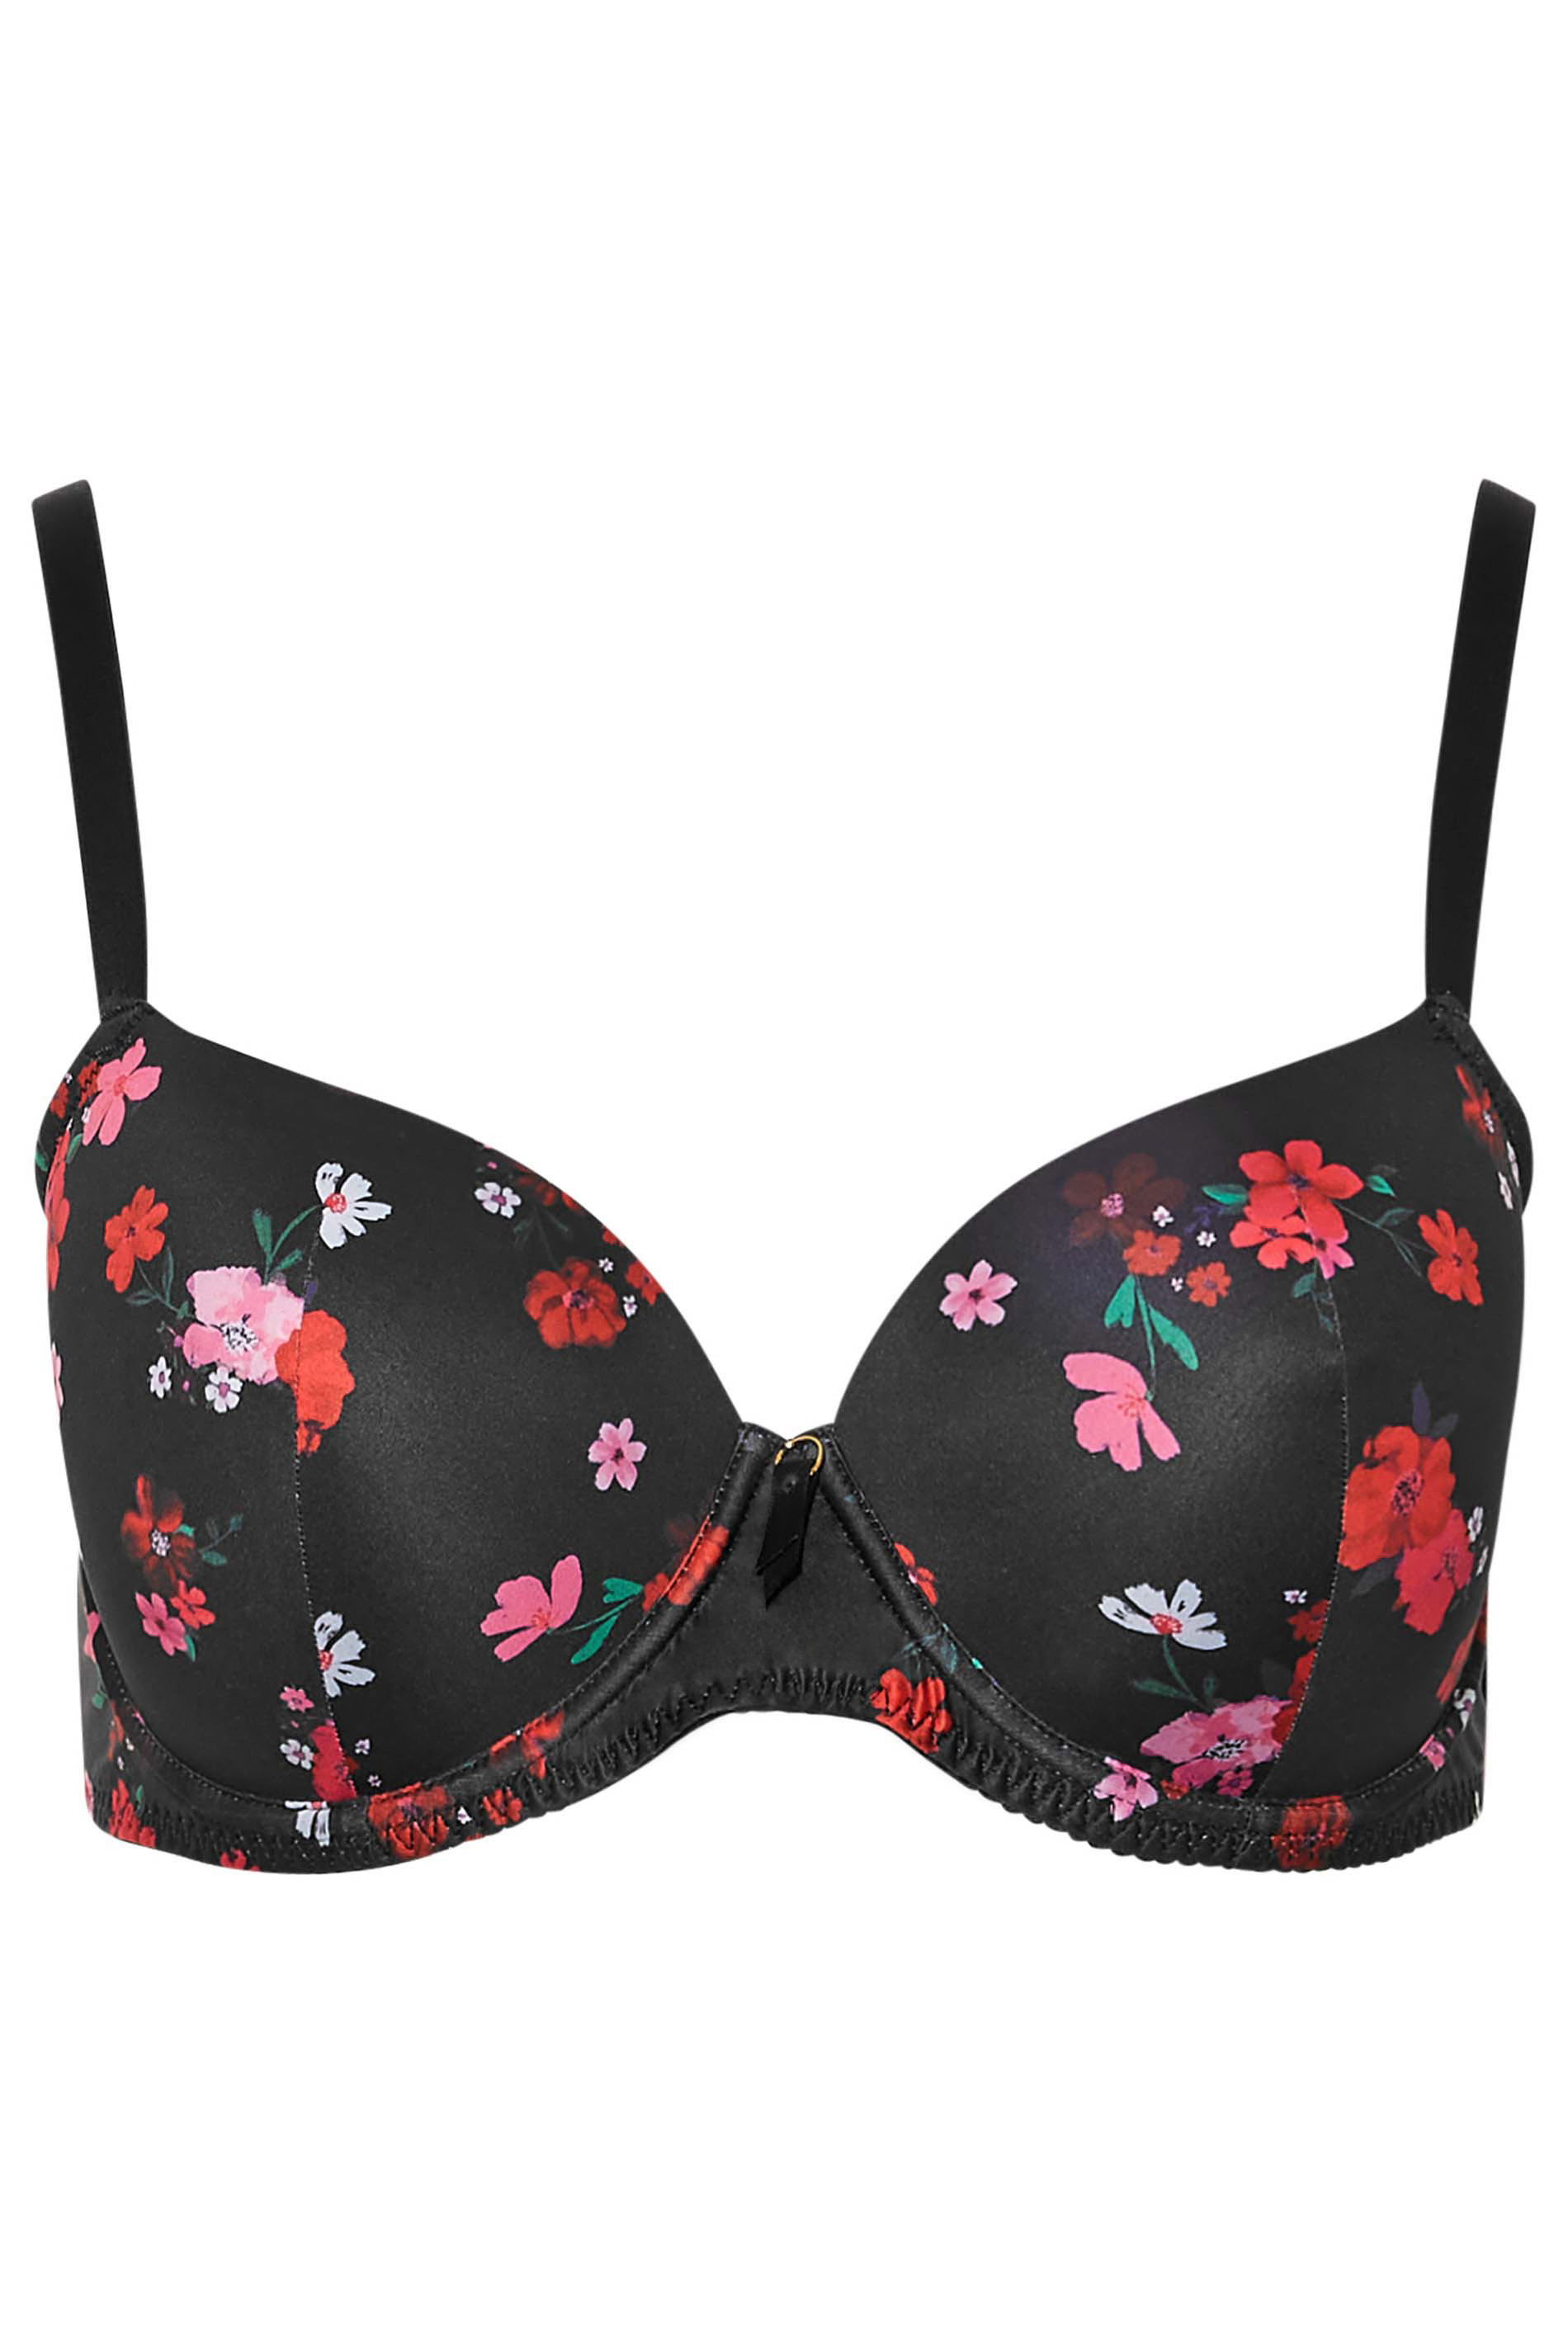 Plus Size 2 Pack Black & Red Floral Padded Underwired T-Shirt Bras